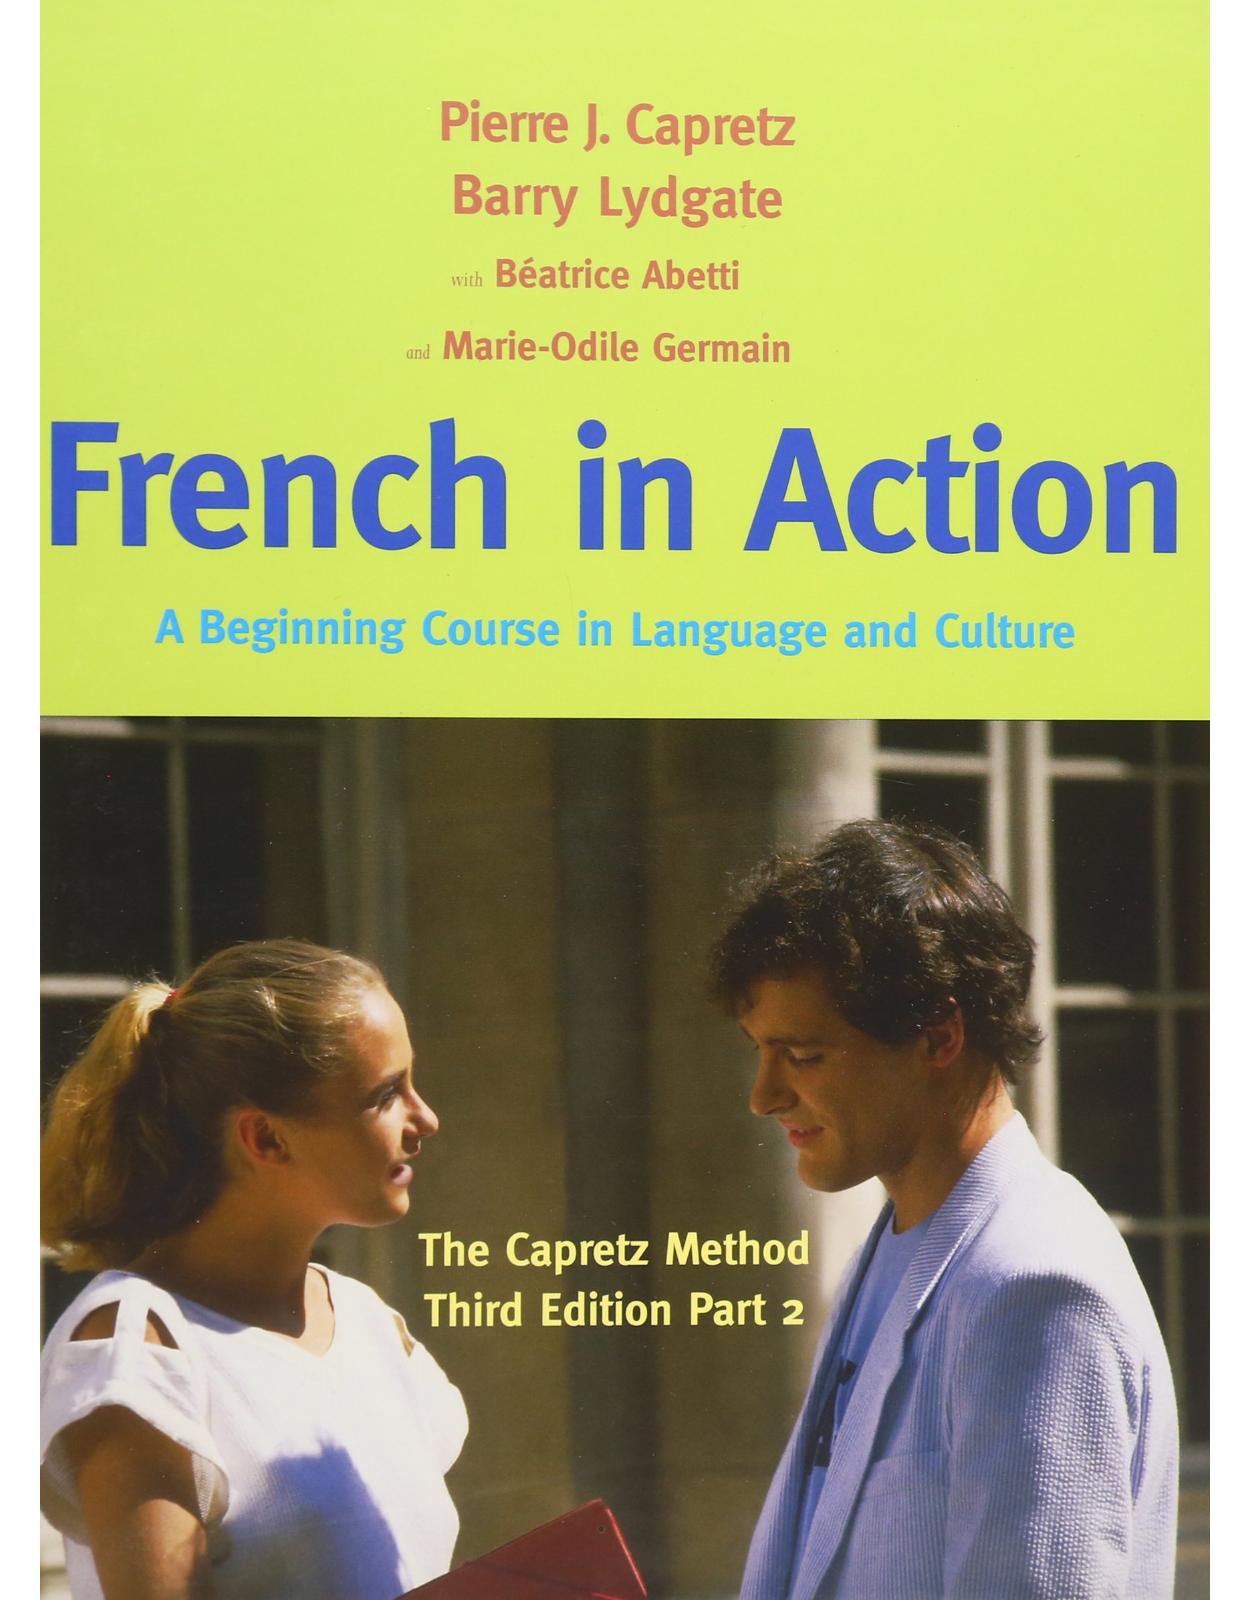 French in Action, Textbook, Part 2. A Beginning Course in Language and Culture: The Capretz Method